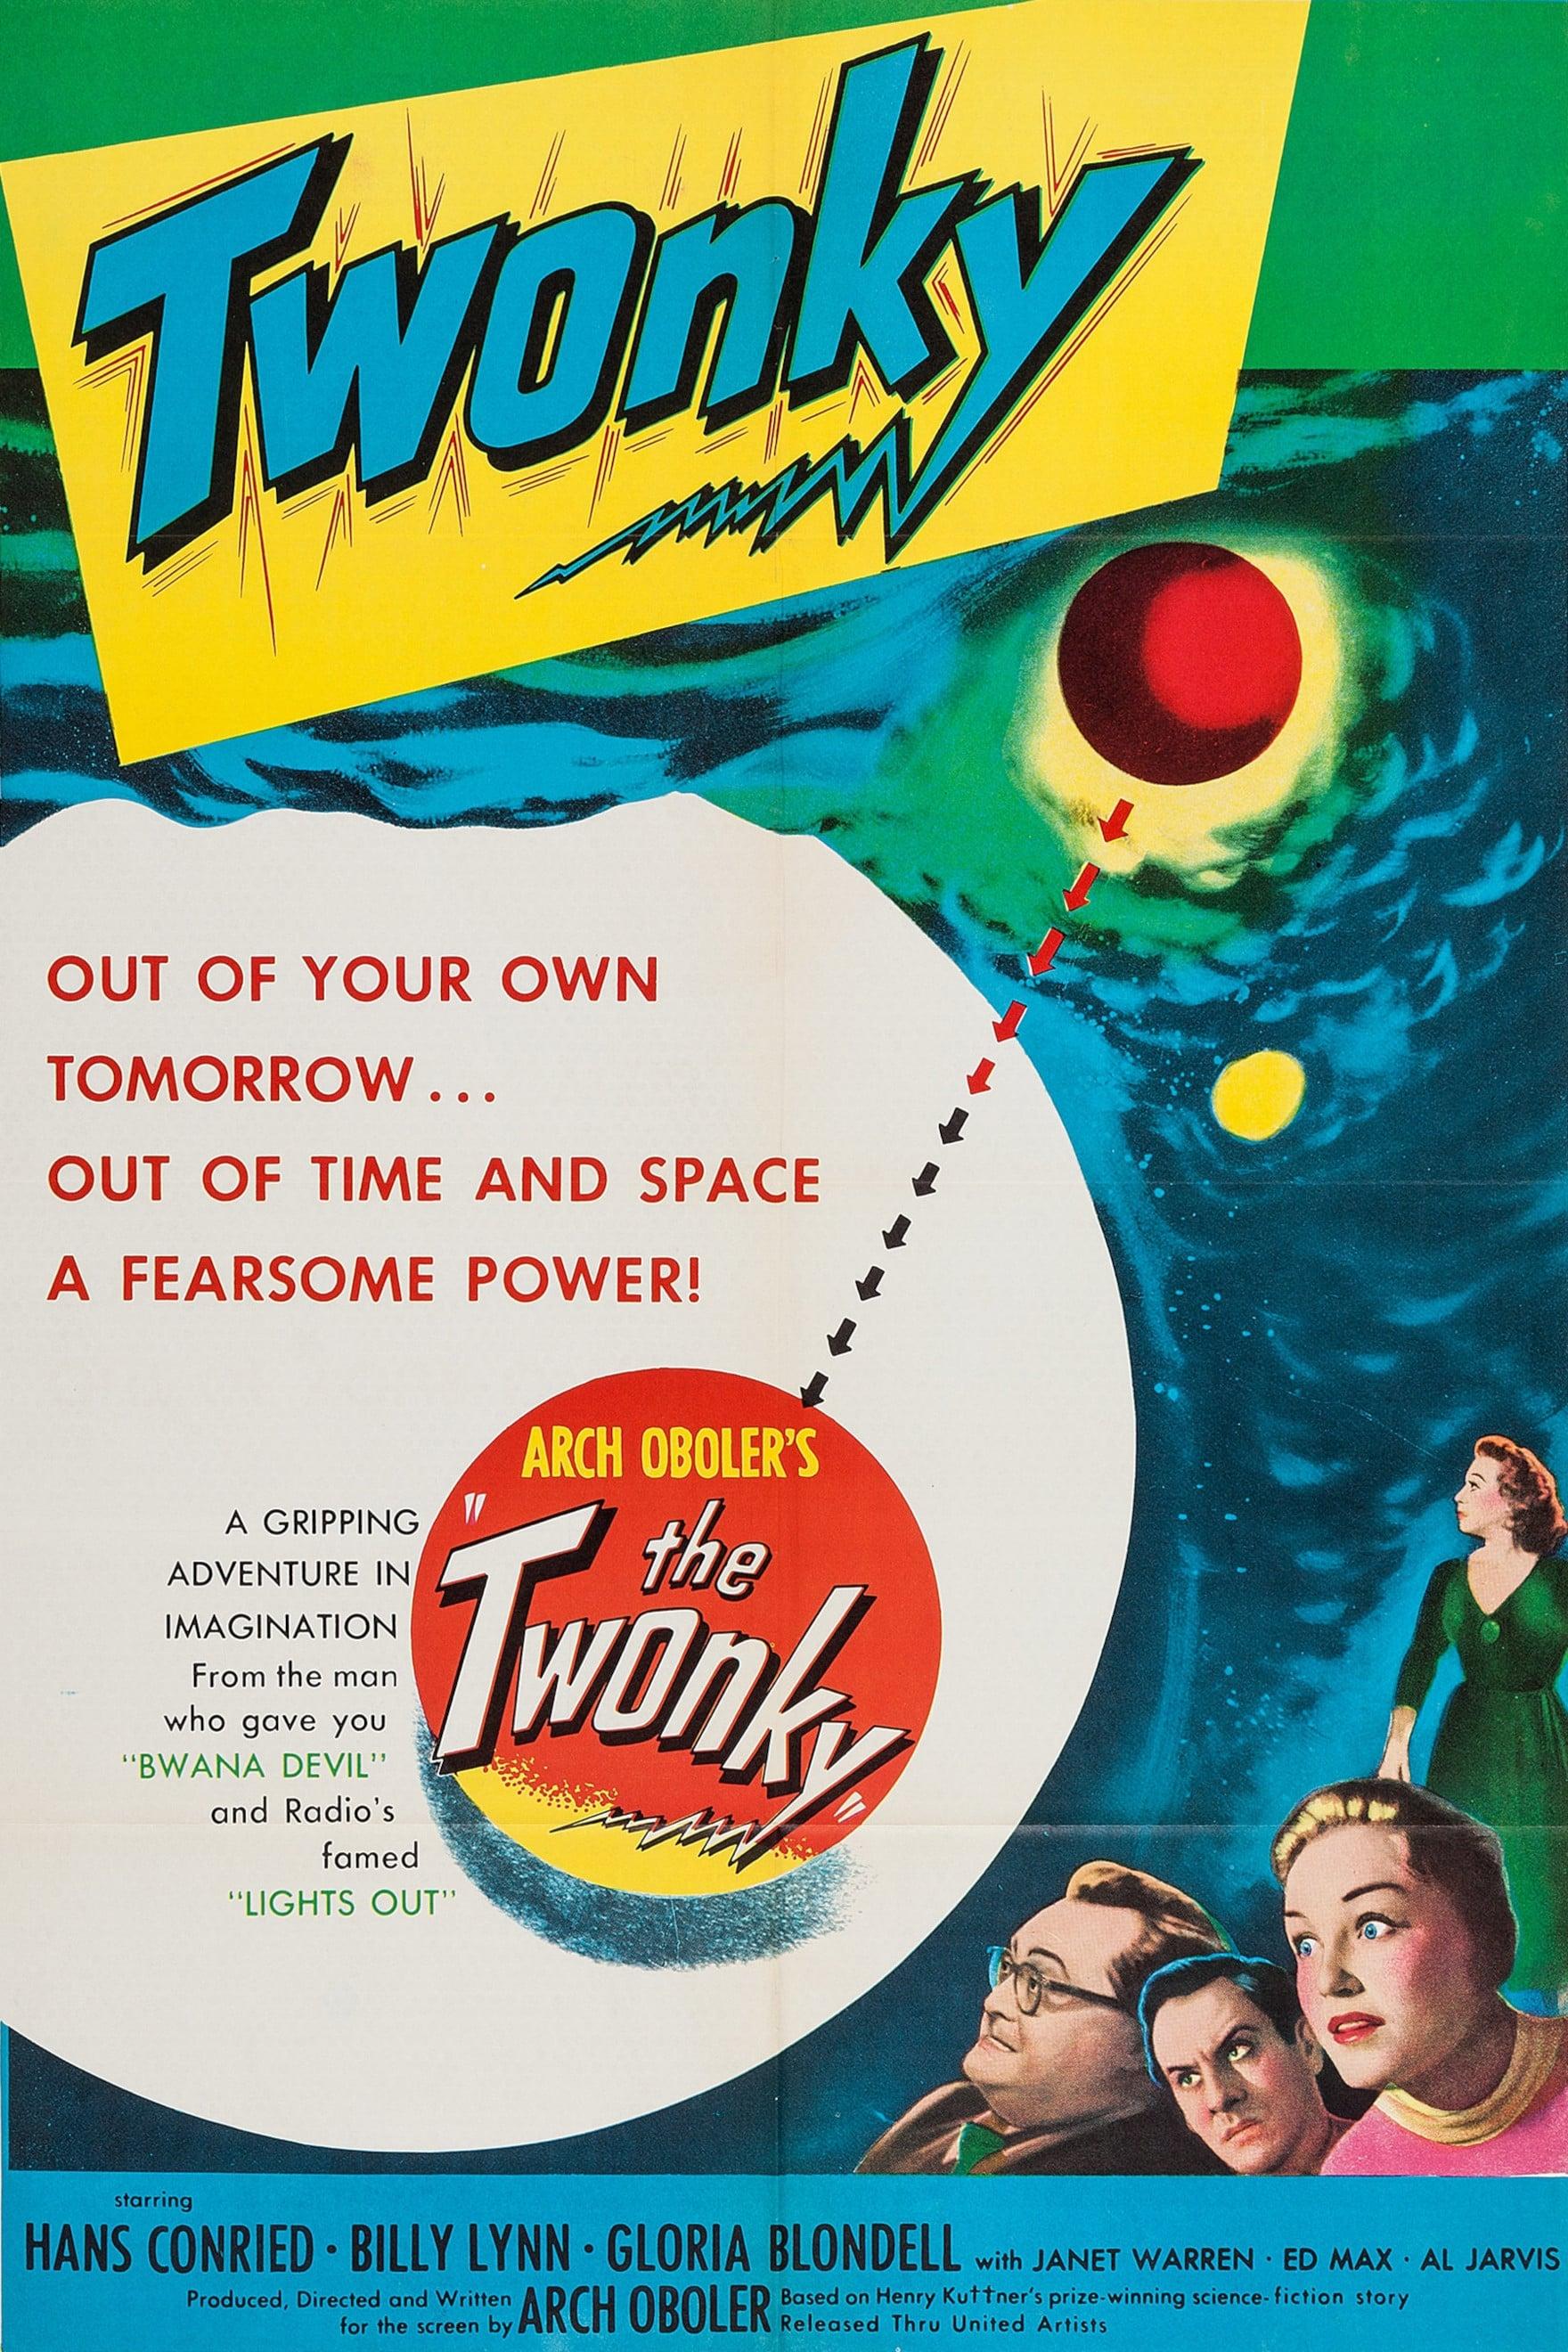 The Twonky poster